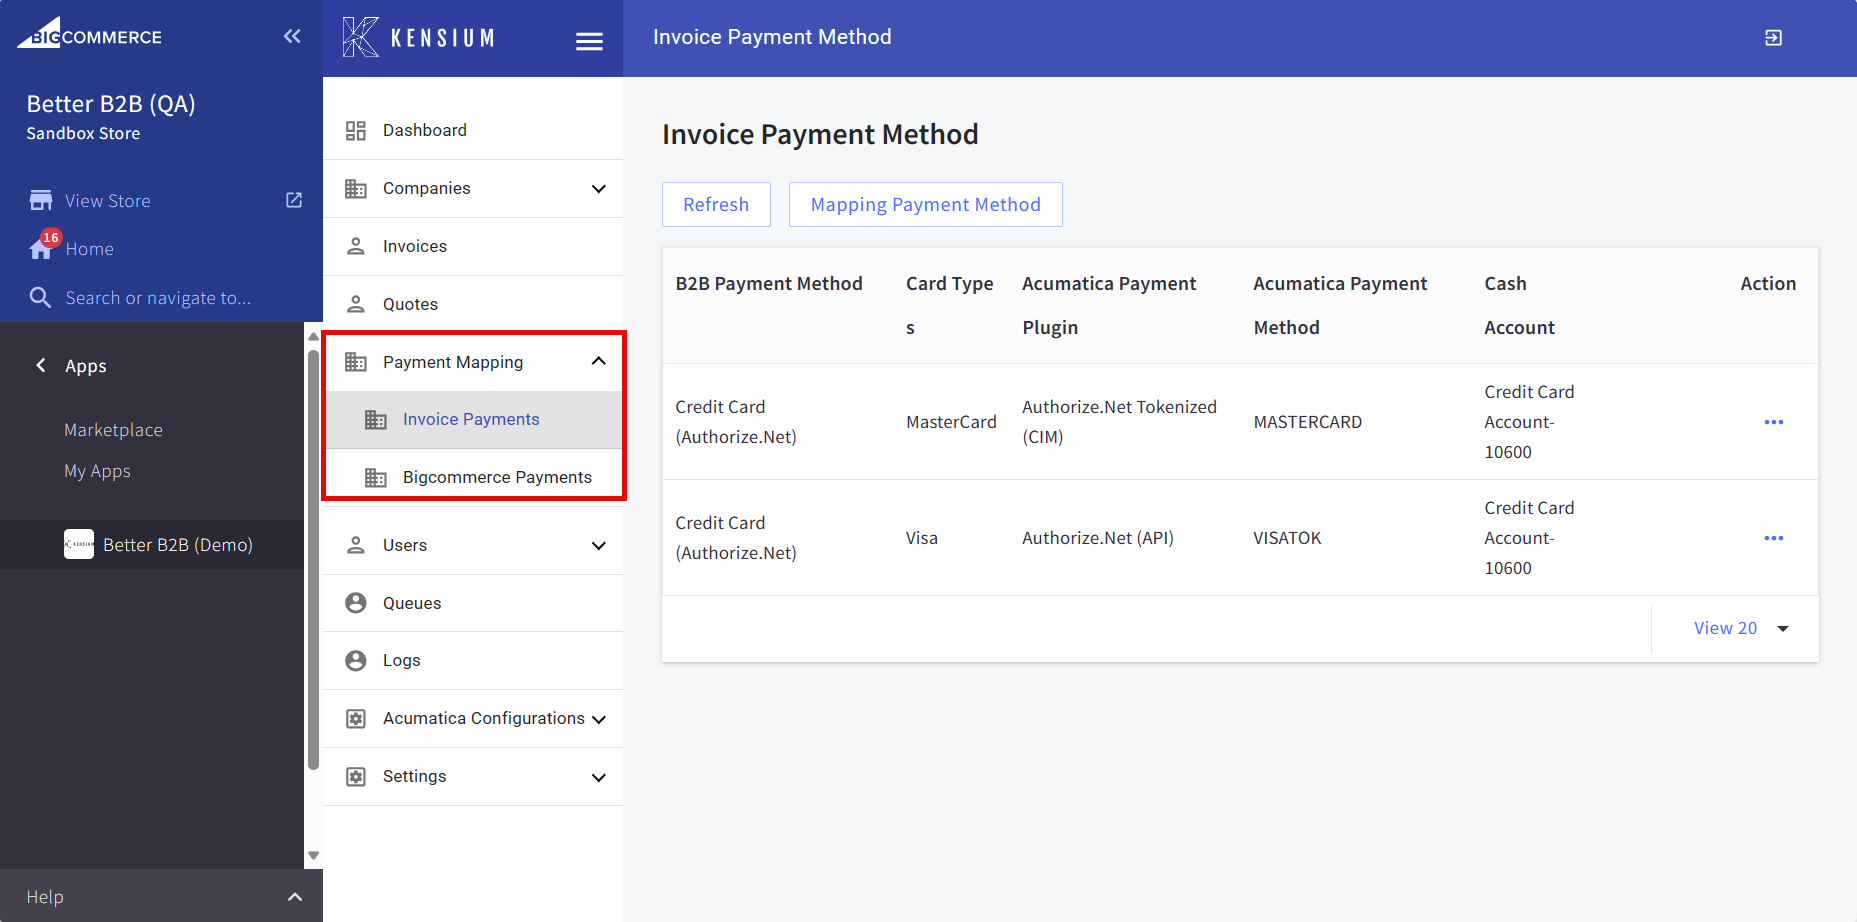 Options available under Payment Mapping